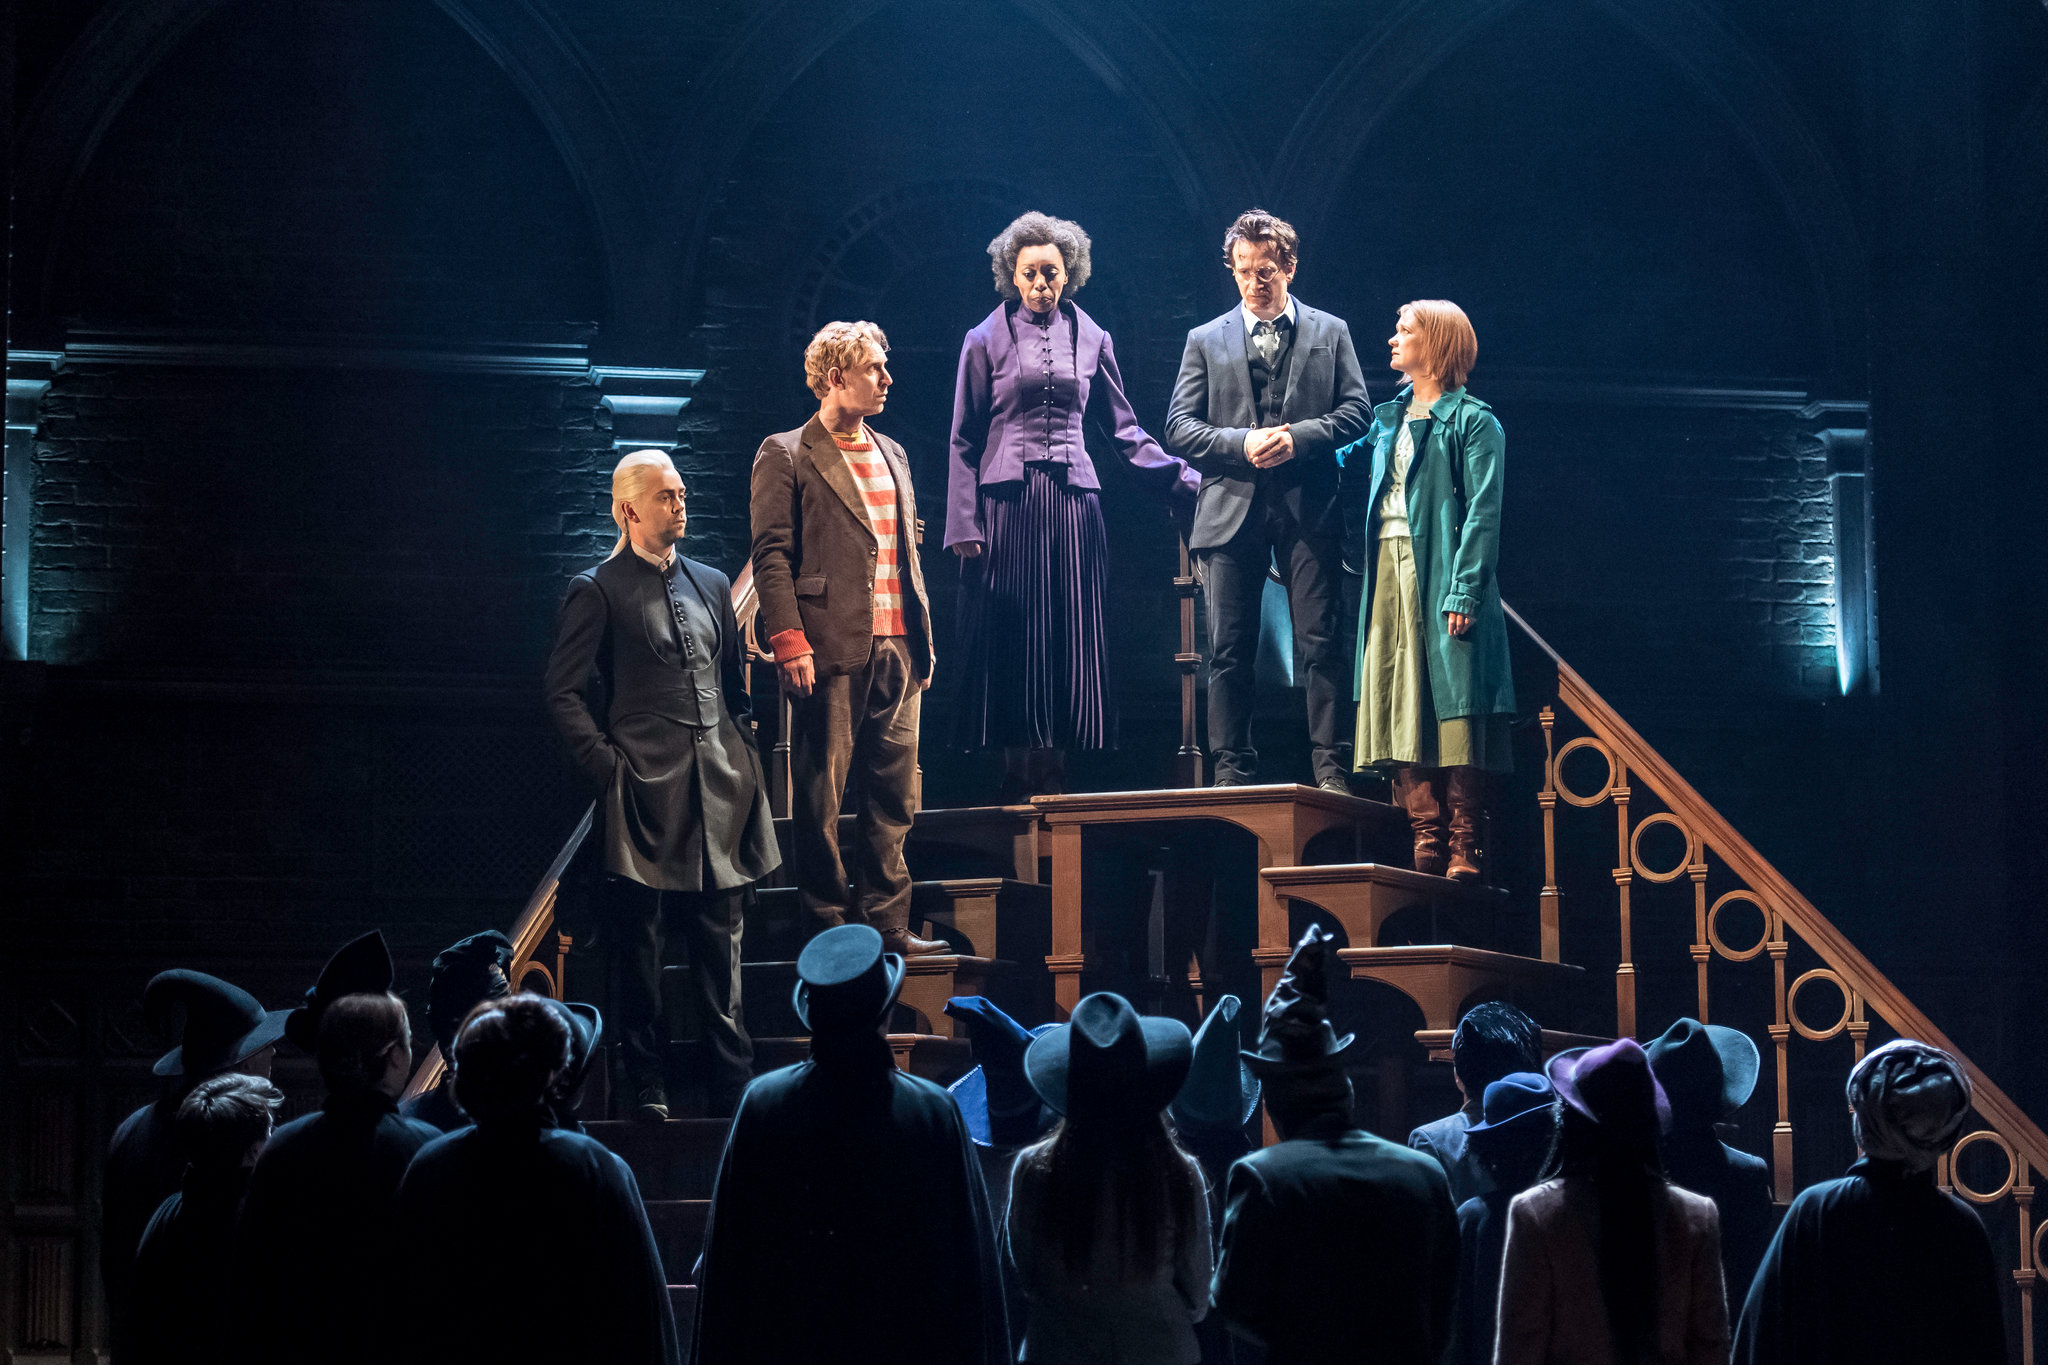 Harry Potter and The Cursed Child - Part 1 & 2 (1PM & 6:30PM) at Lyric Theatre